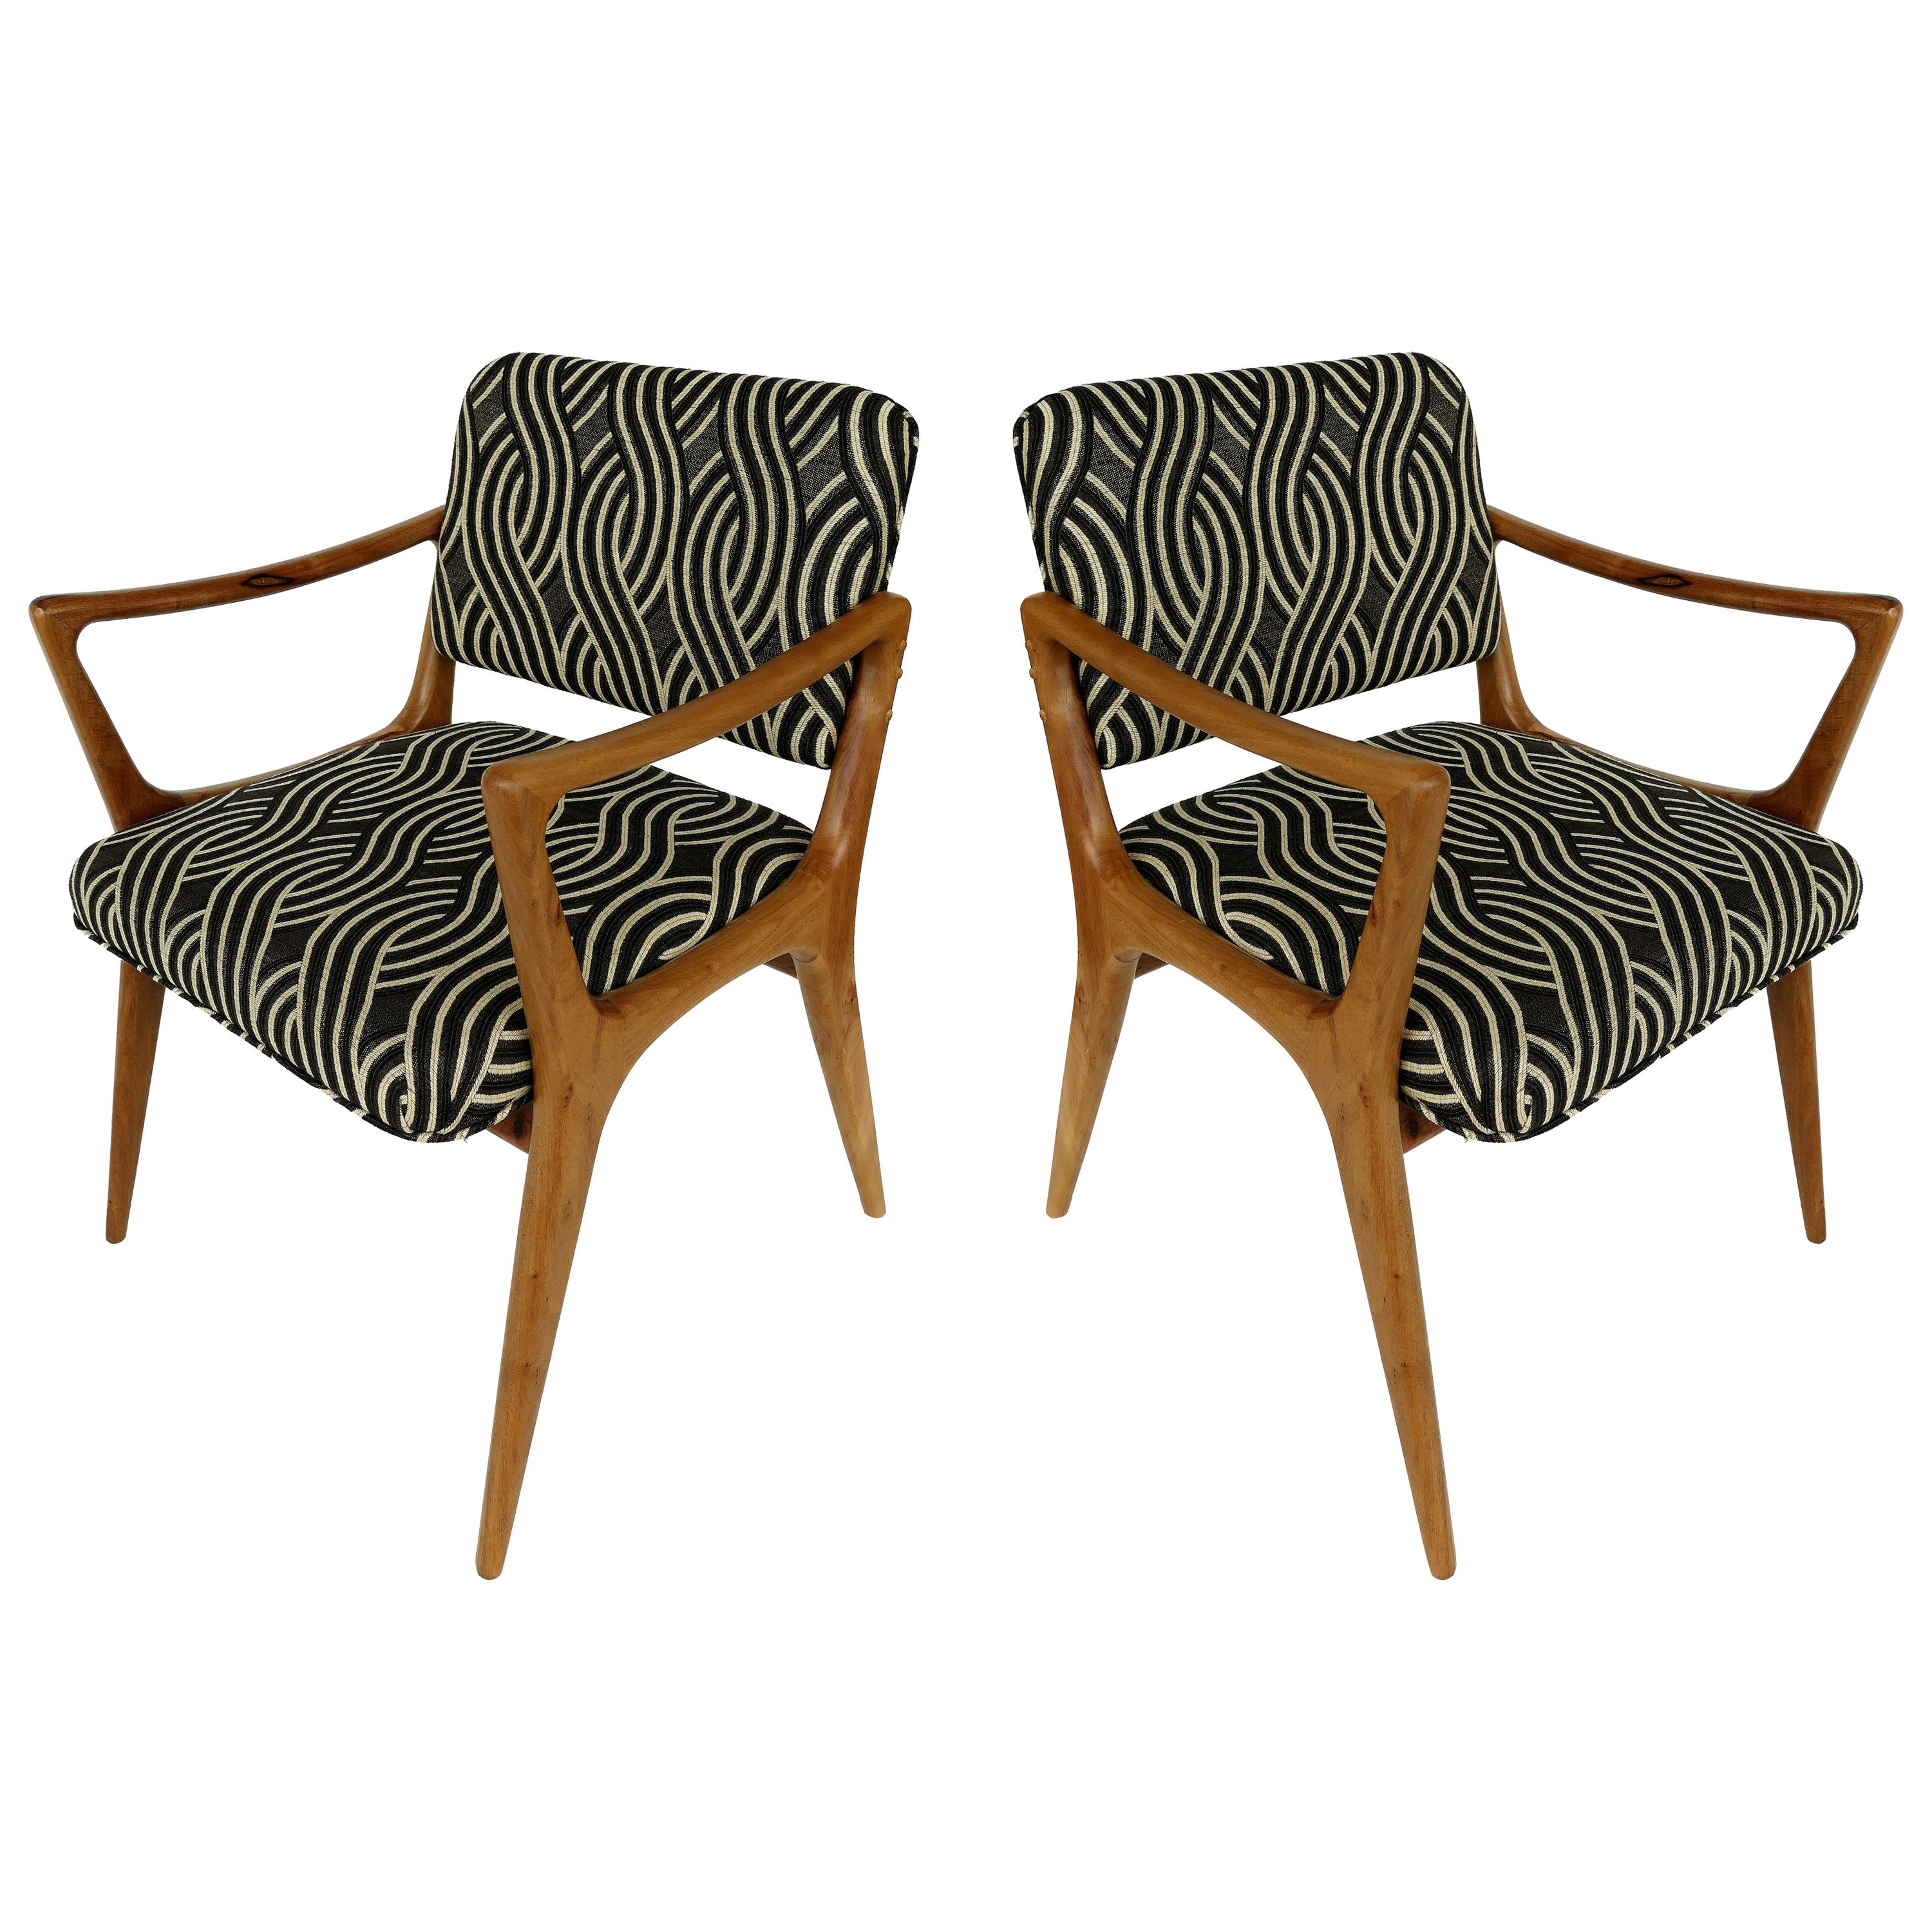 Newly Upholstered Mid-Century Modern Armchairs, Pair